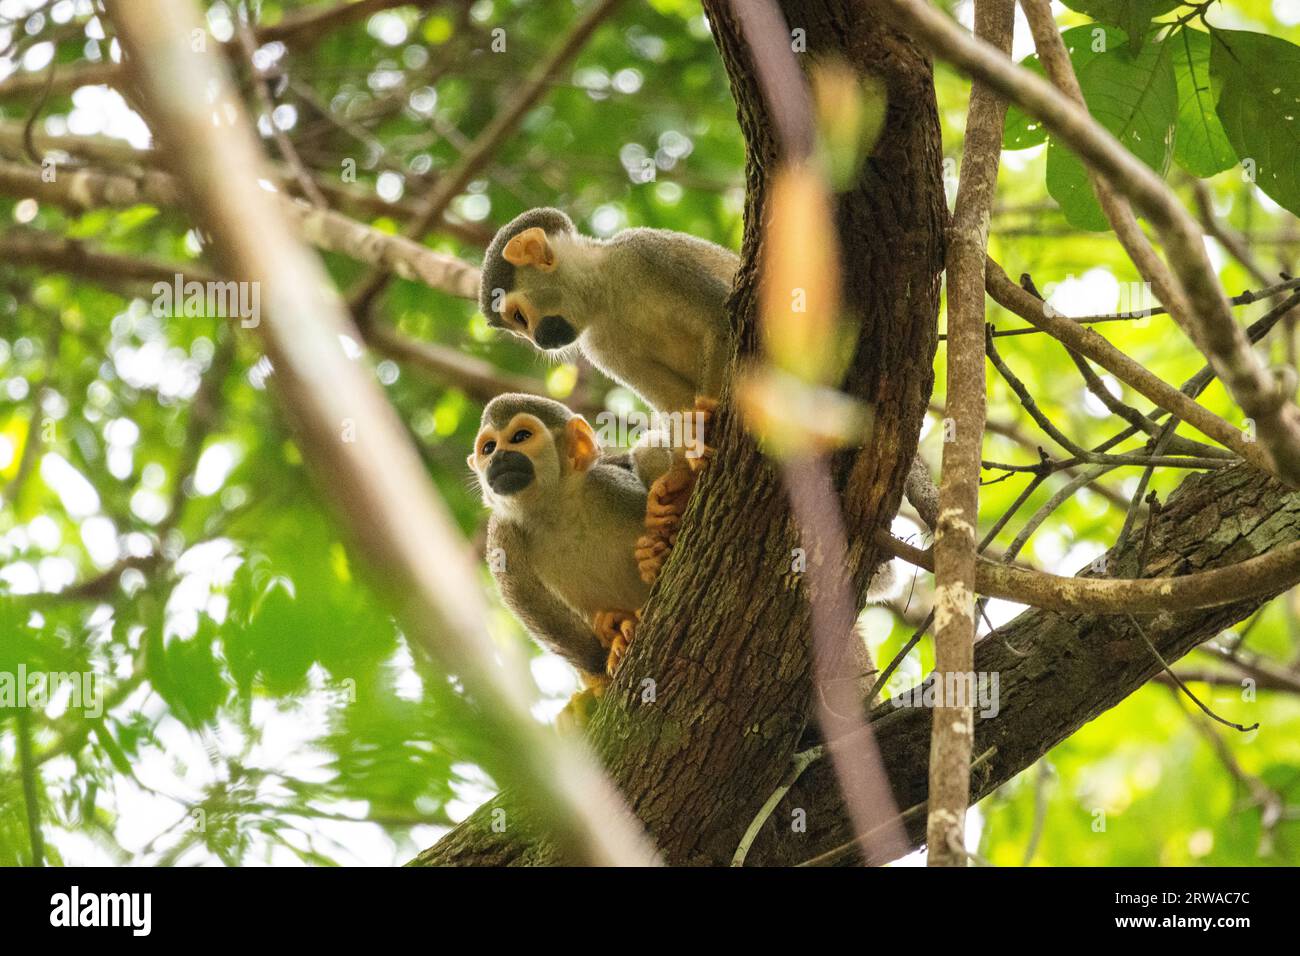 Beautiful view to squirrel monkeys on green tree branch in the amazon rainforest, Mato Grosso State, Brazil Stock Photo